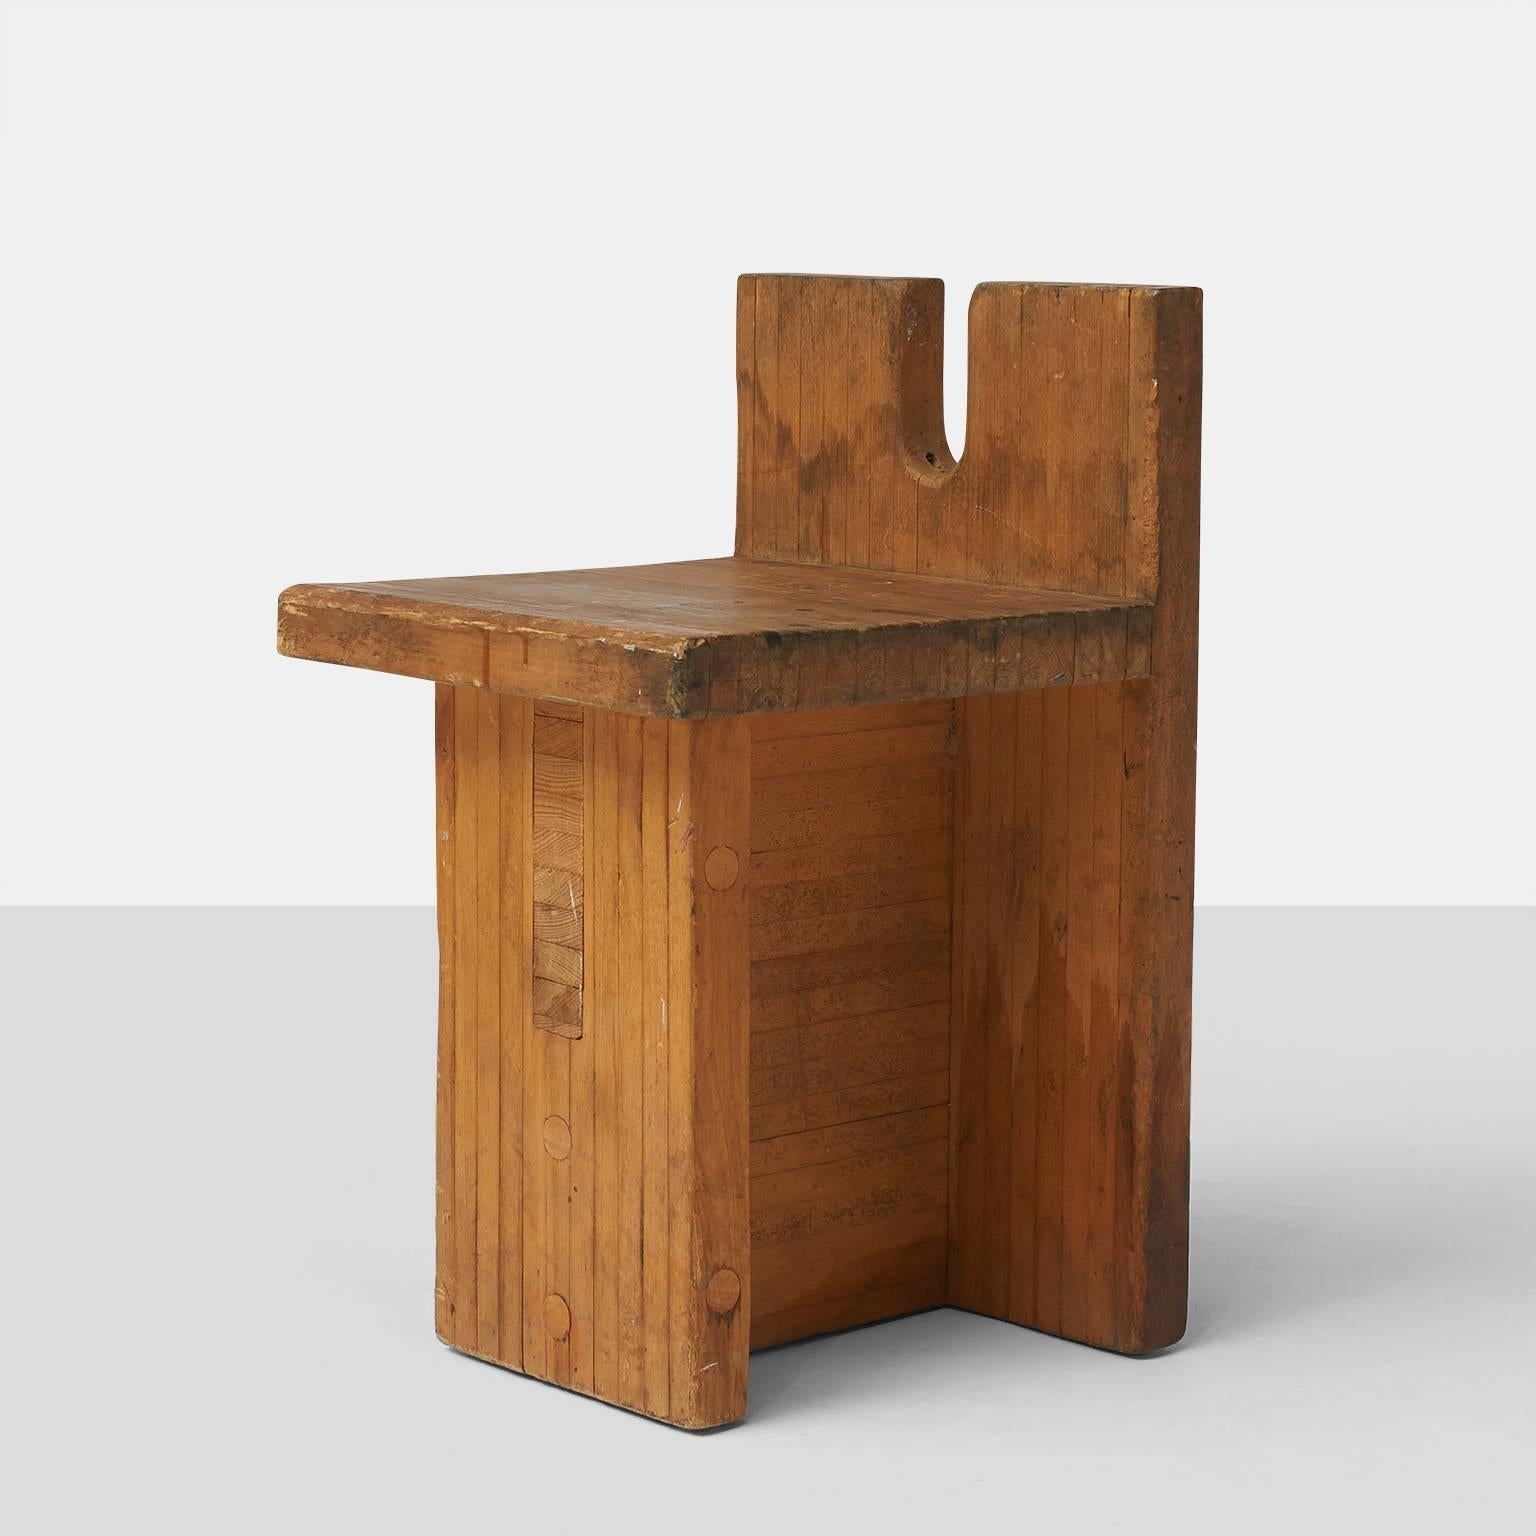 A side chair in solid pine wood designed by Lina Bo Bardi and created for the center SESC Pompeia in Sao Paulo.
Brazil.